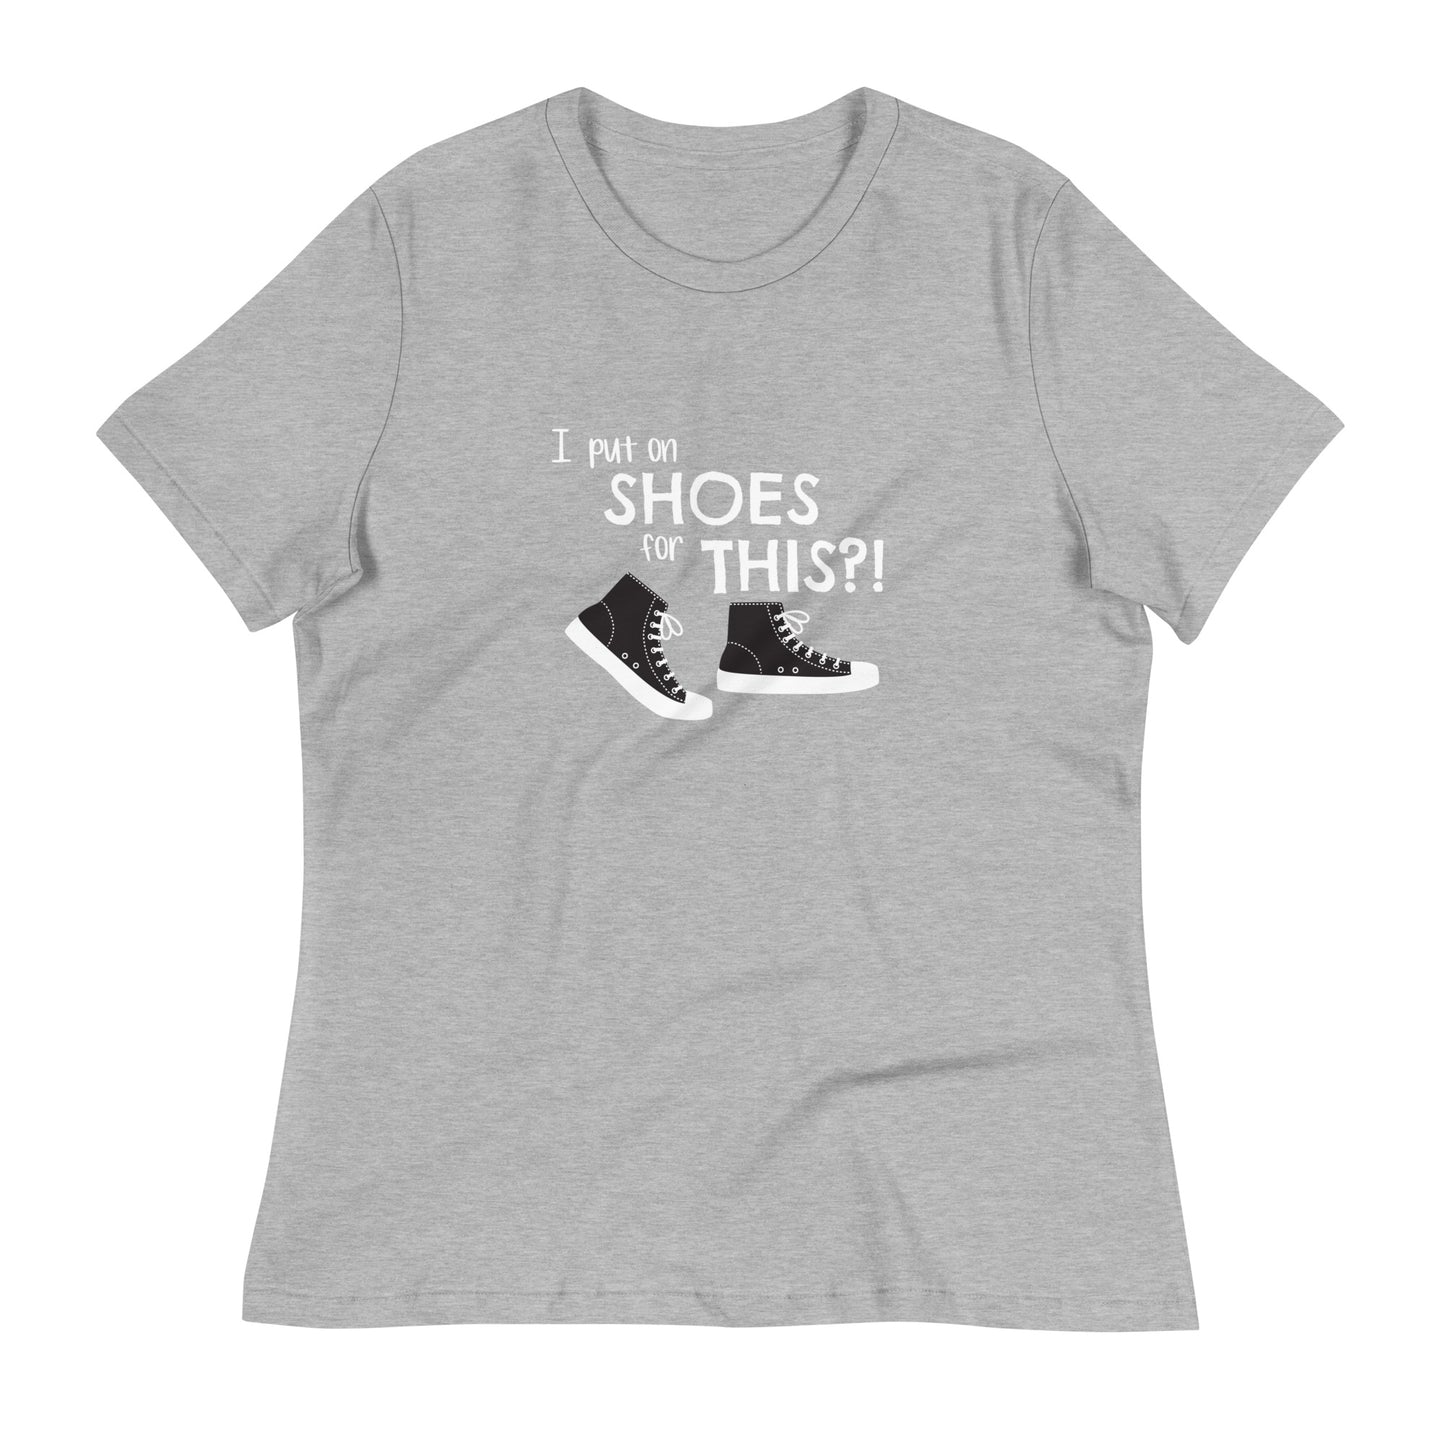 Athletic Heather women's relaxed fit t-shirt with graphic of black and white canvas "chuck" sneakers and text: "I put on SHOES for THIS?!"